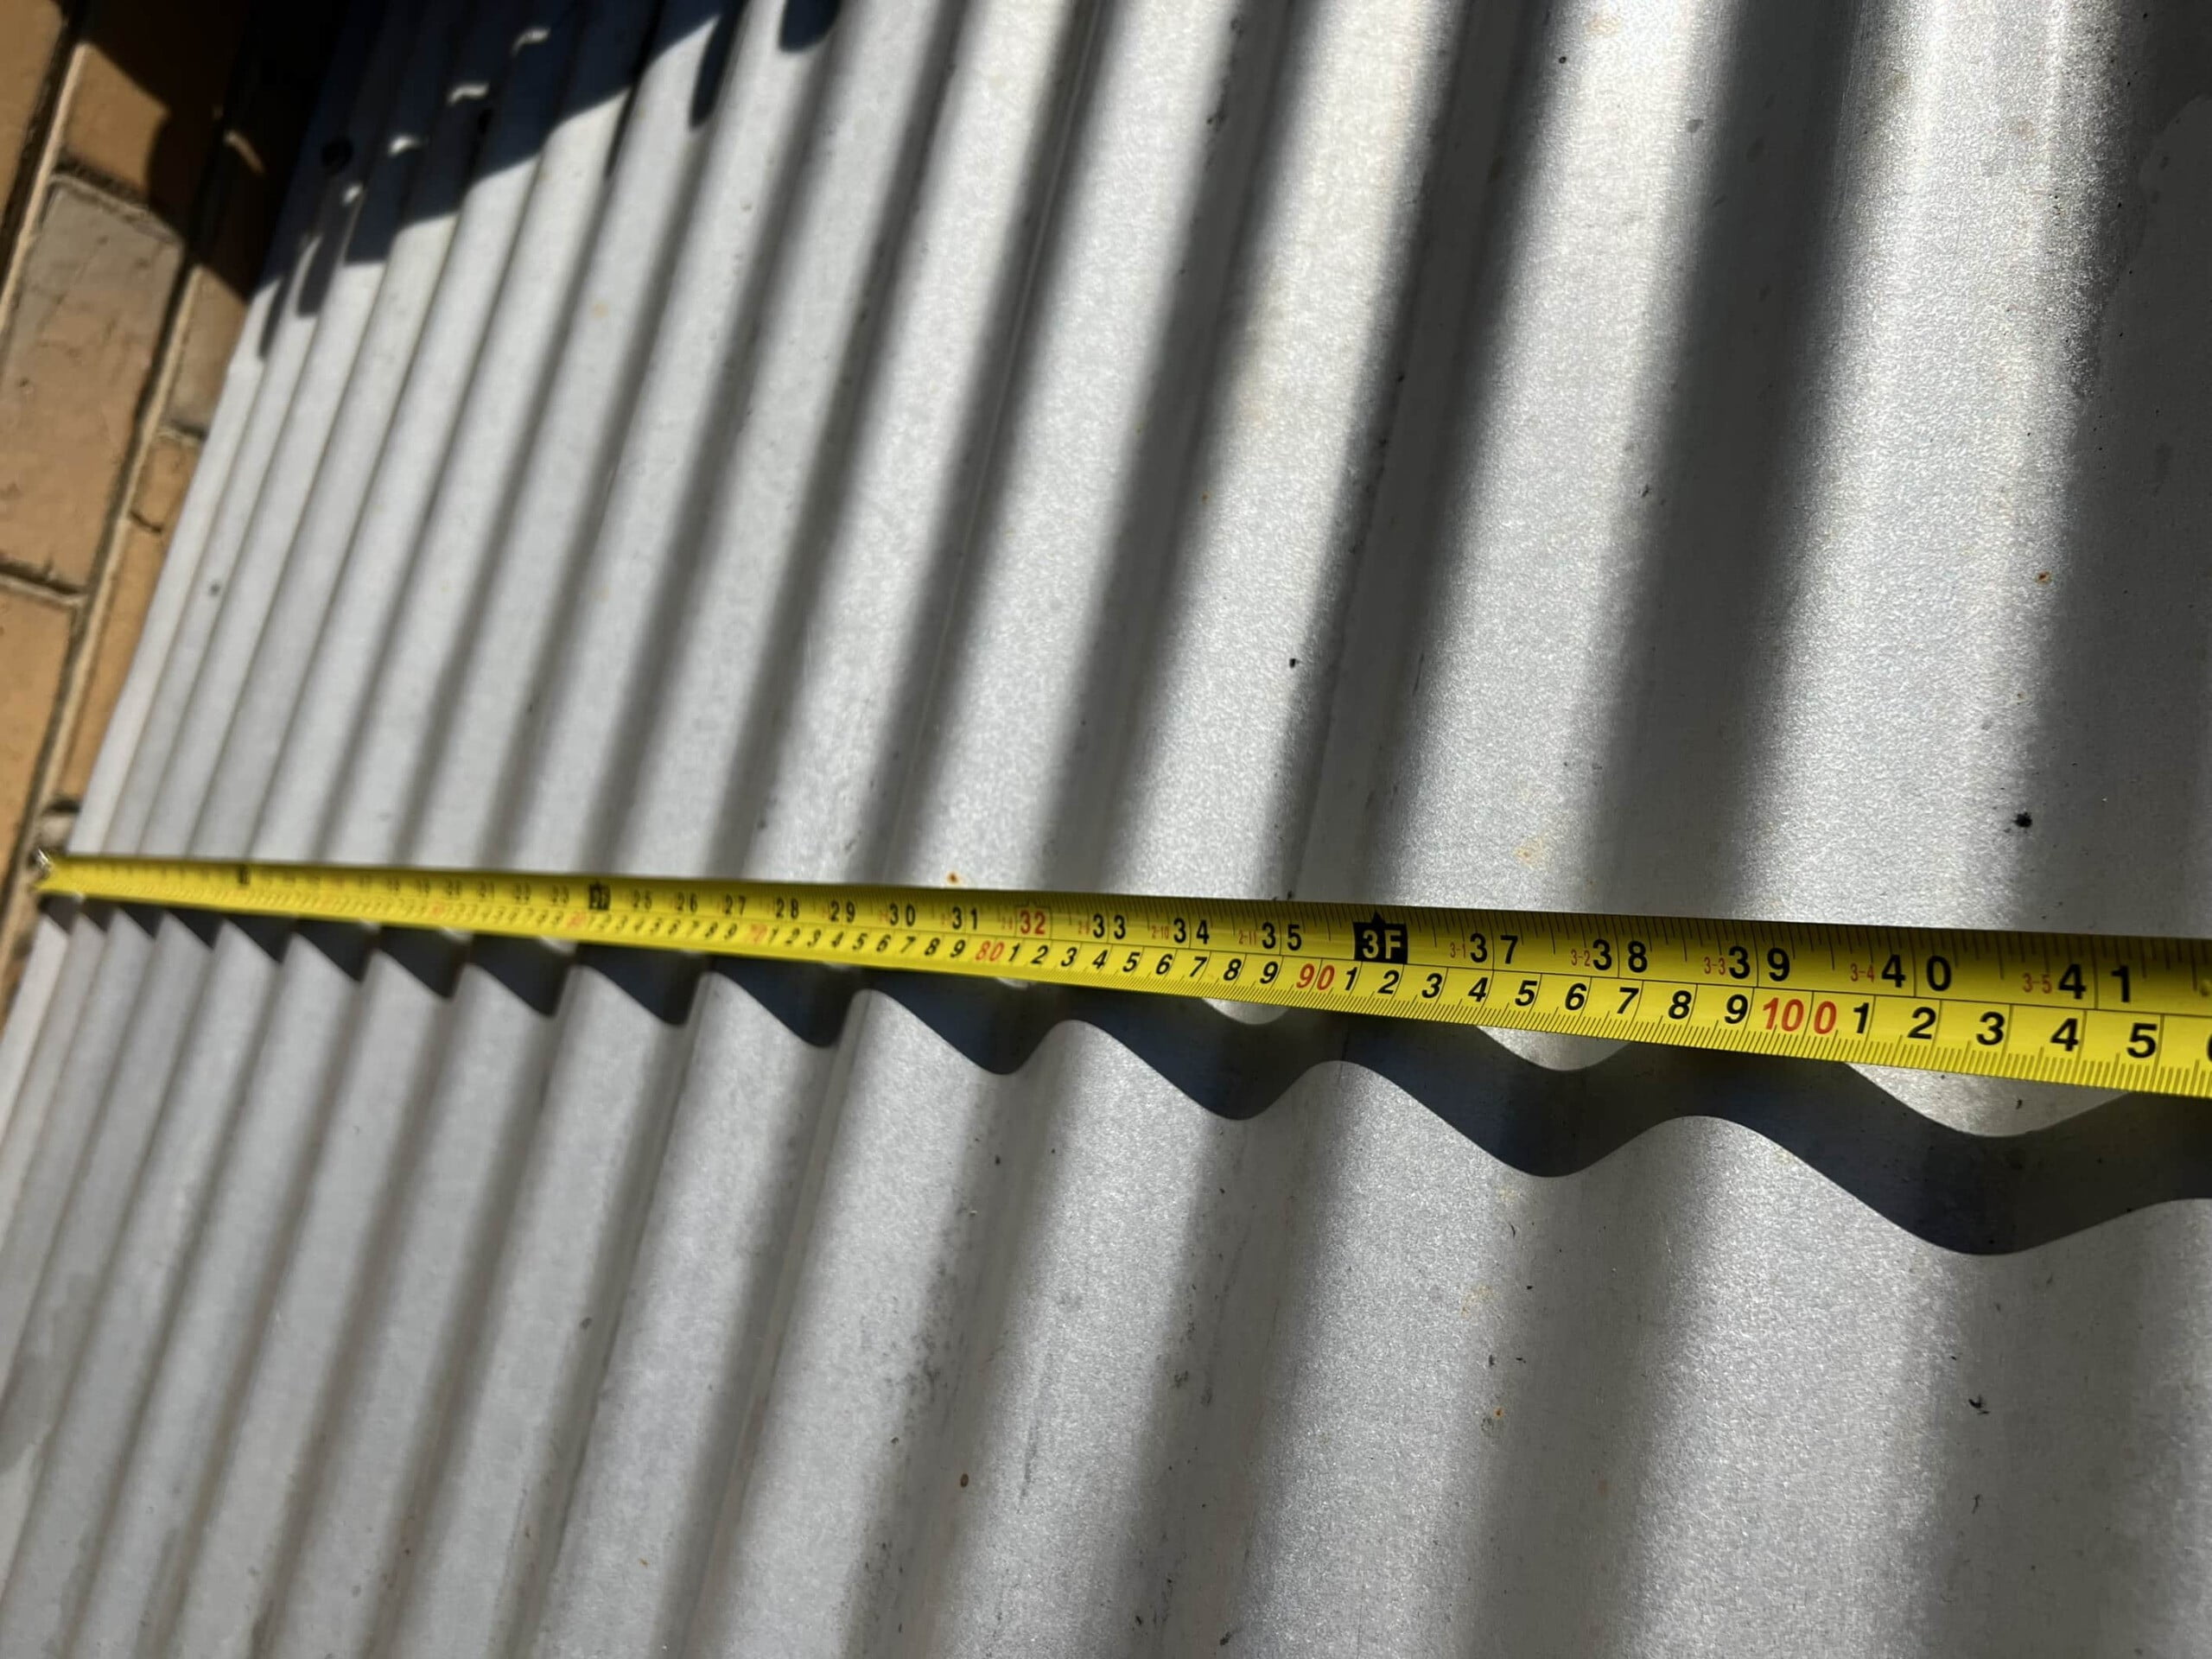 Measuring a corrugated roof for gutter guard